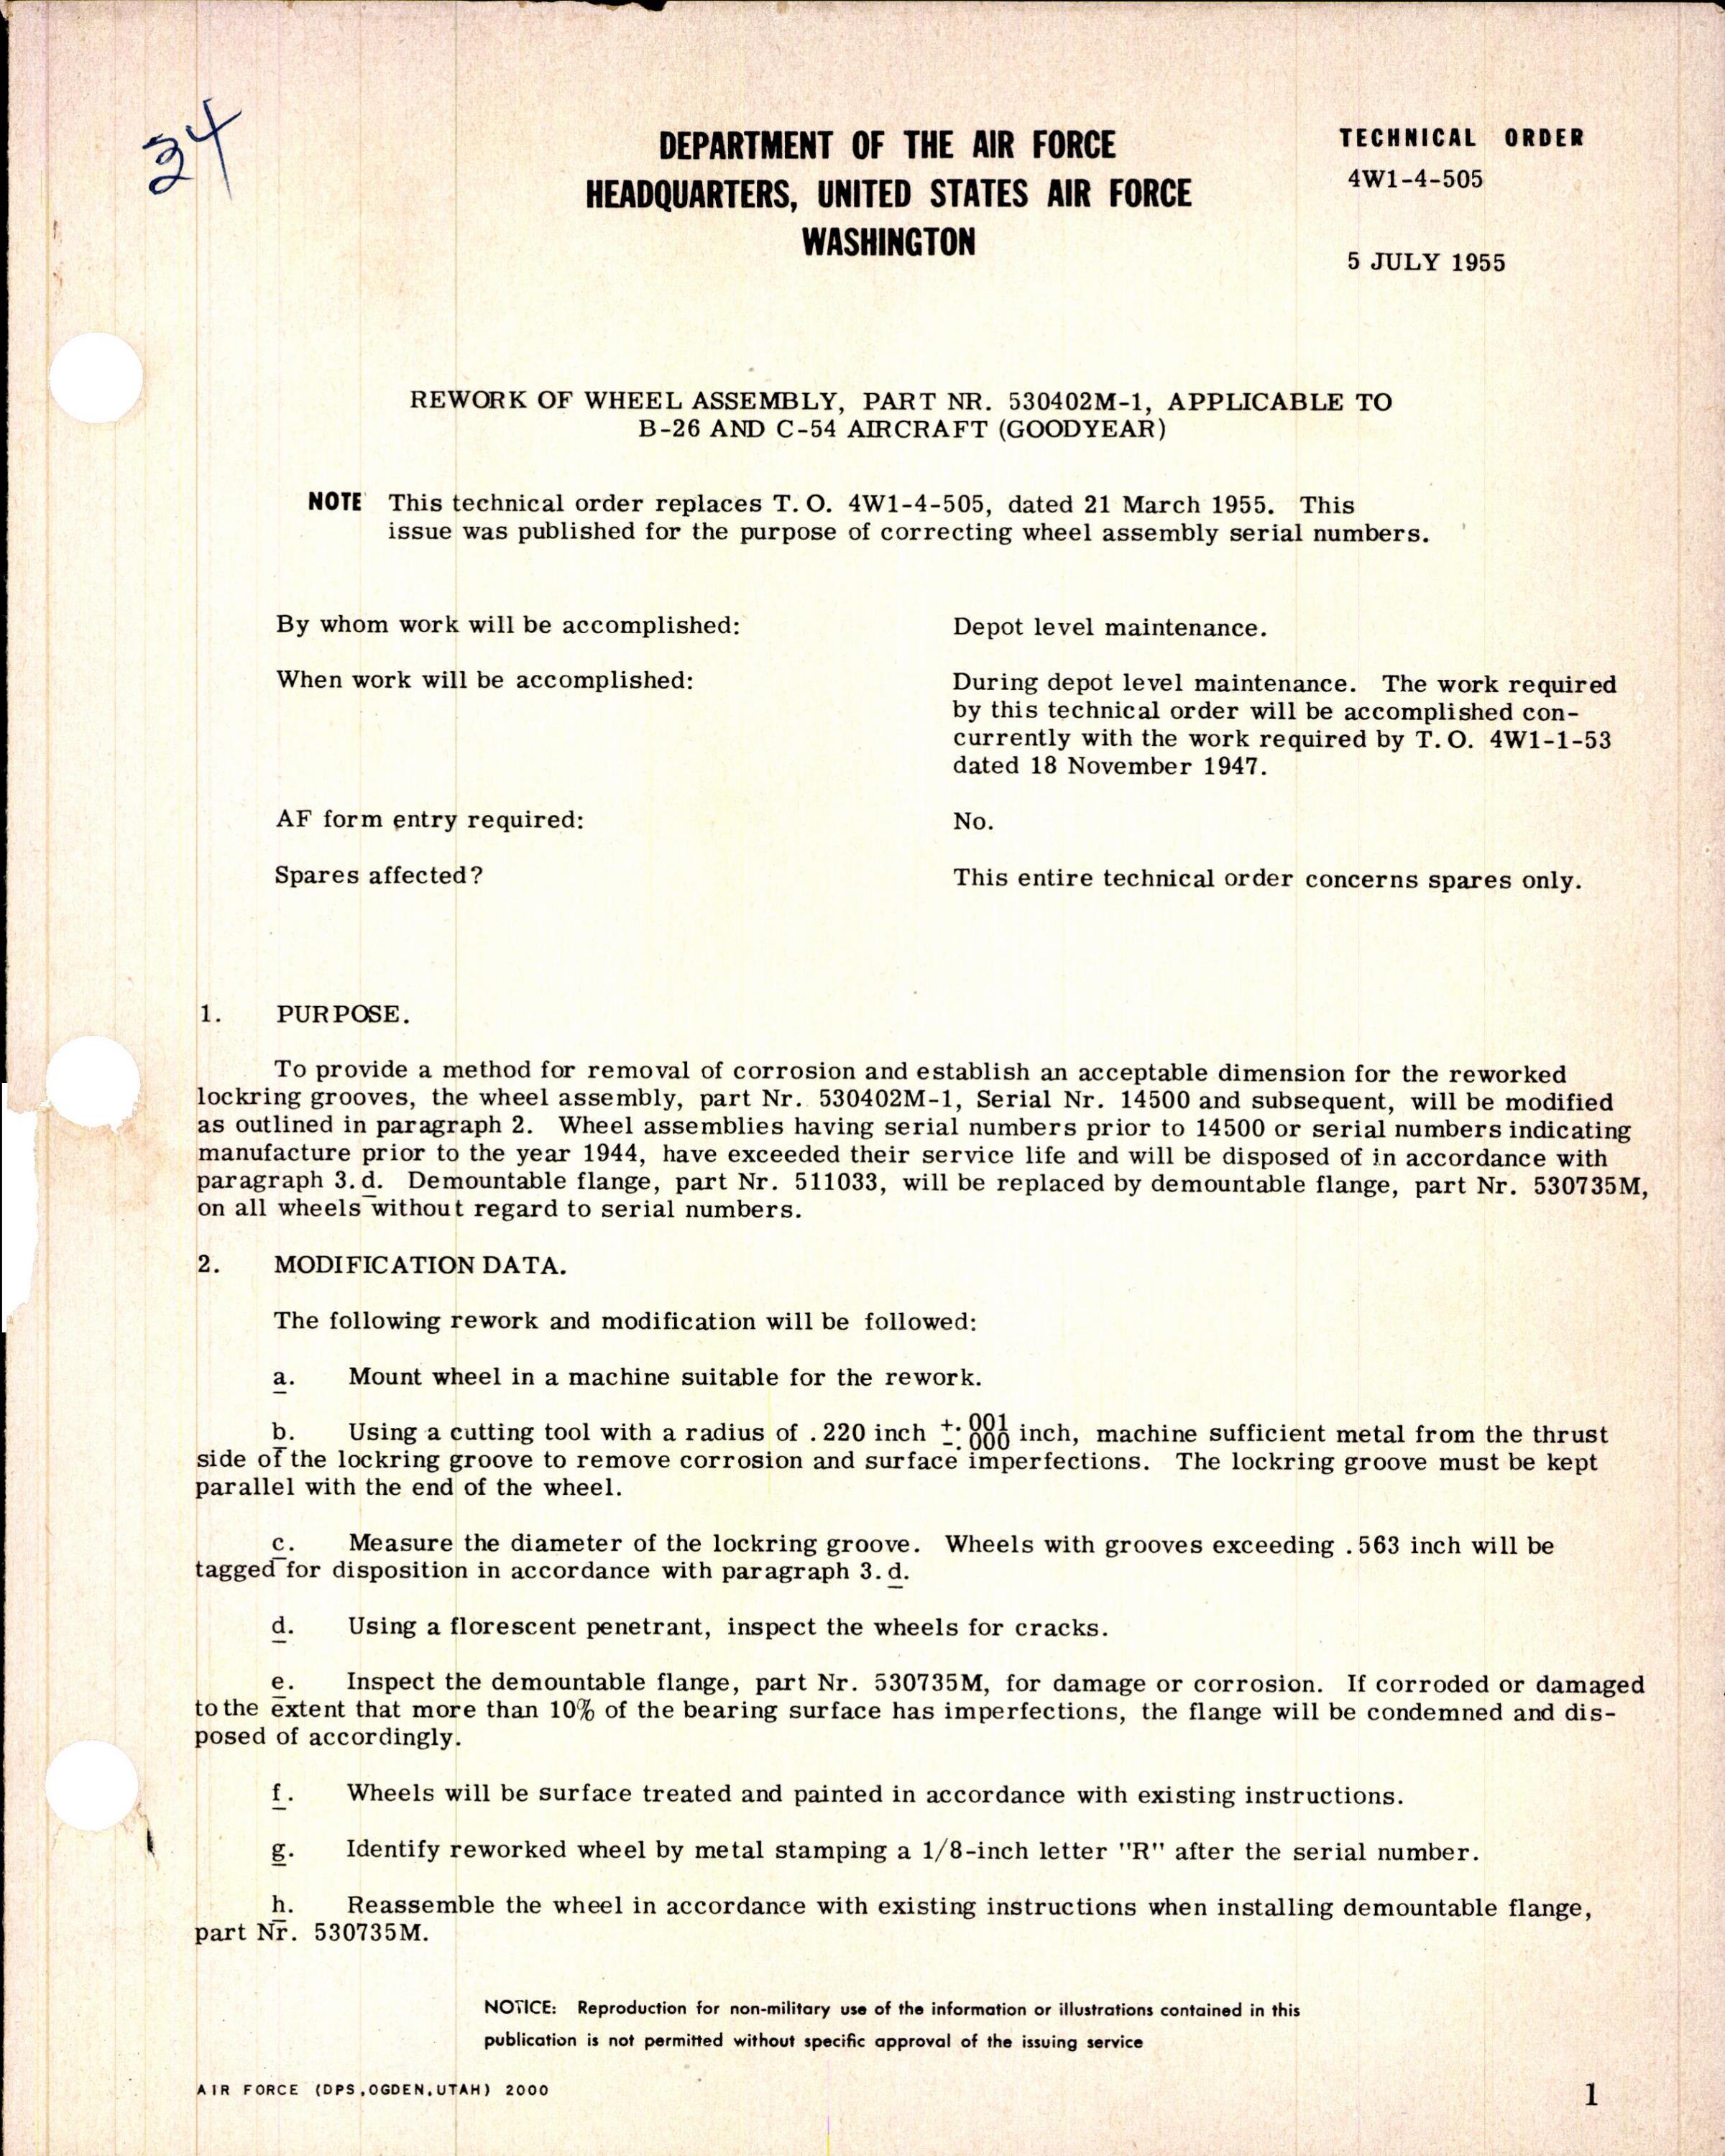 Sample page 1 from AirCorps Library document: Rework of Wheel Assembly, Part No 530402M-1 for B-26 and C-54 Aircraft